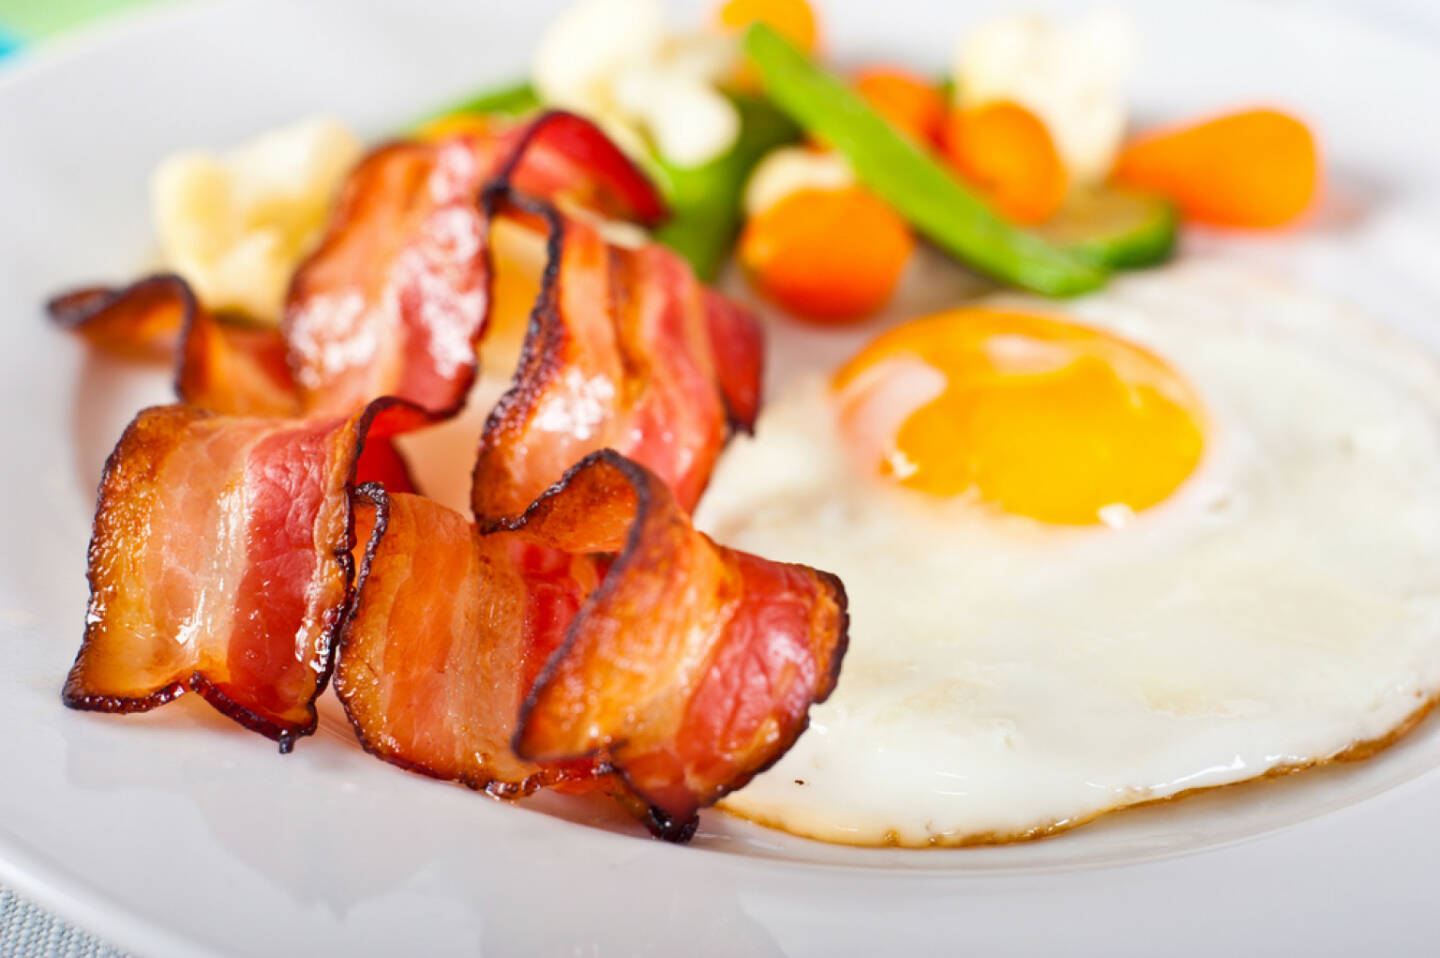 Frühstück, USA, bacon & eggs, Spiegelei, Ei, Speck, food, http://www.shutterstock.com/de/pic-77970088/stock-photo-close-up-of-fried-egg-with-bacon-and-vegetables.html 